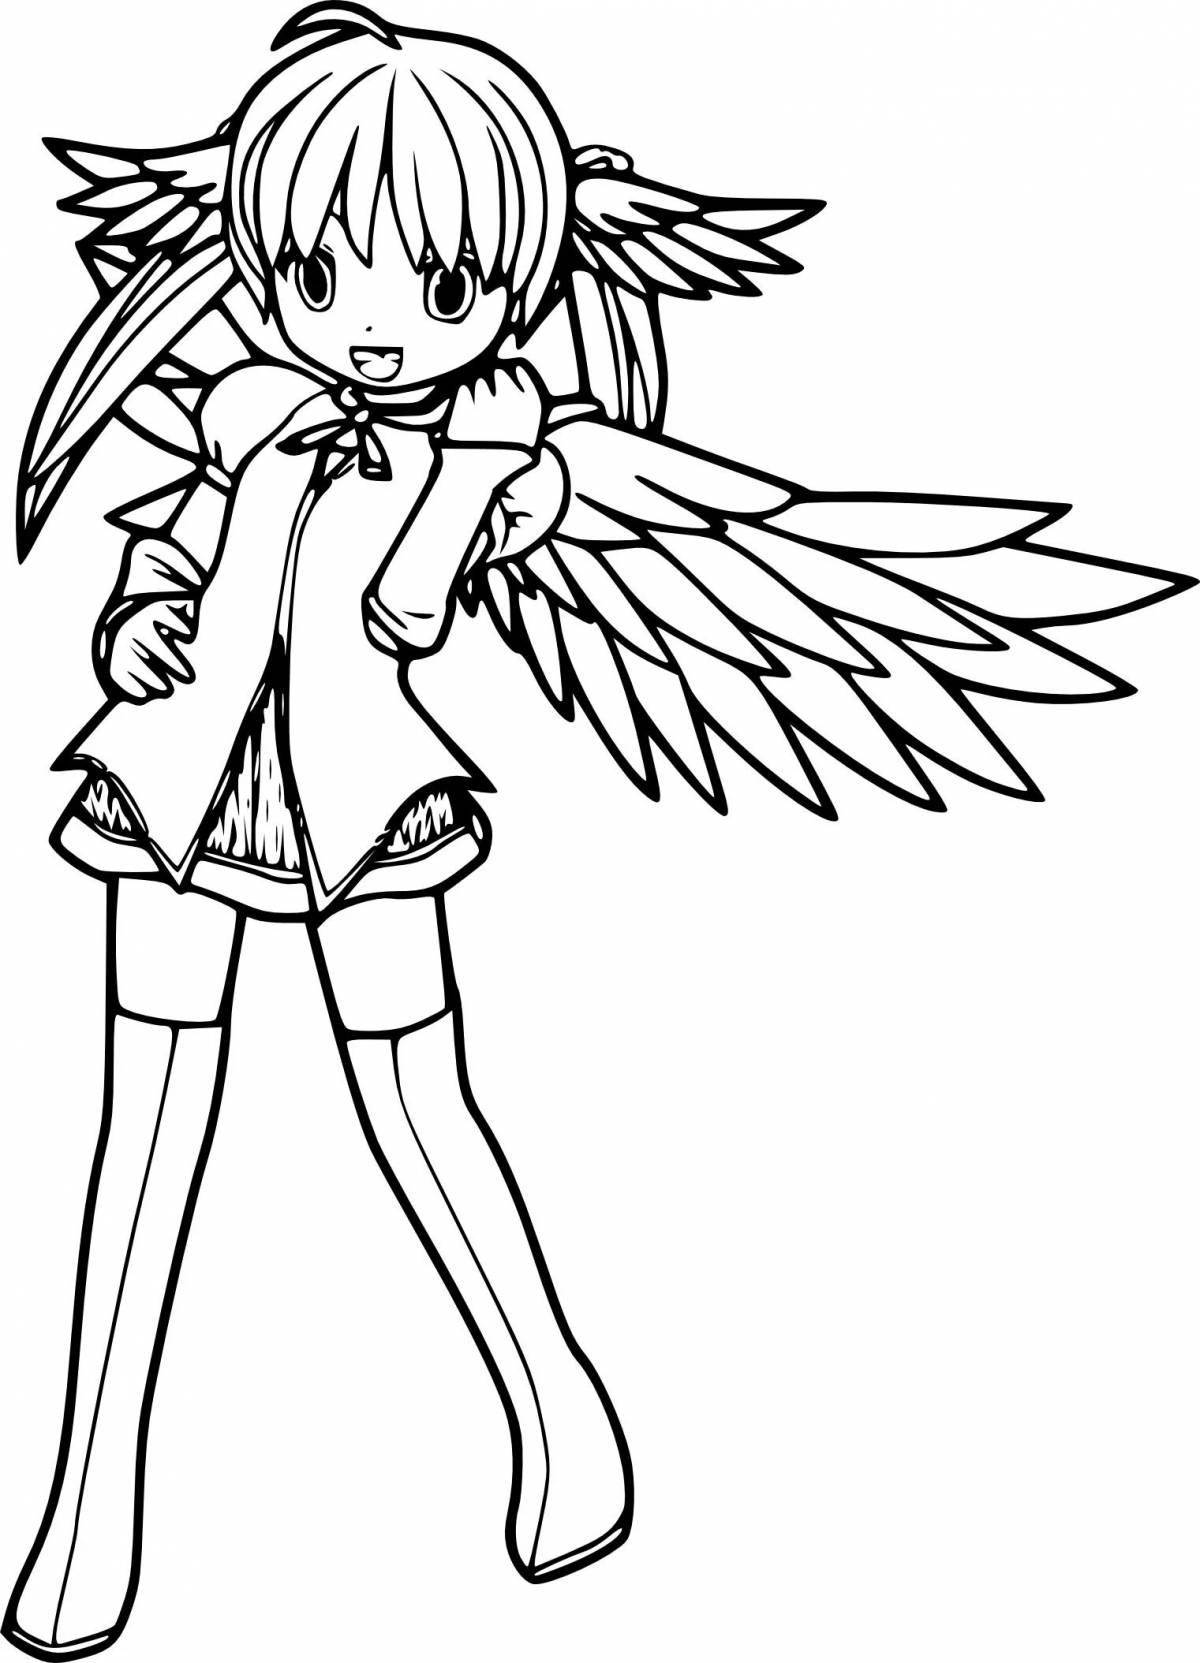 Live coloring girl with wings